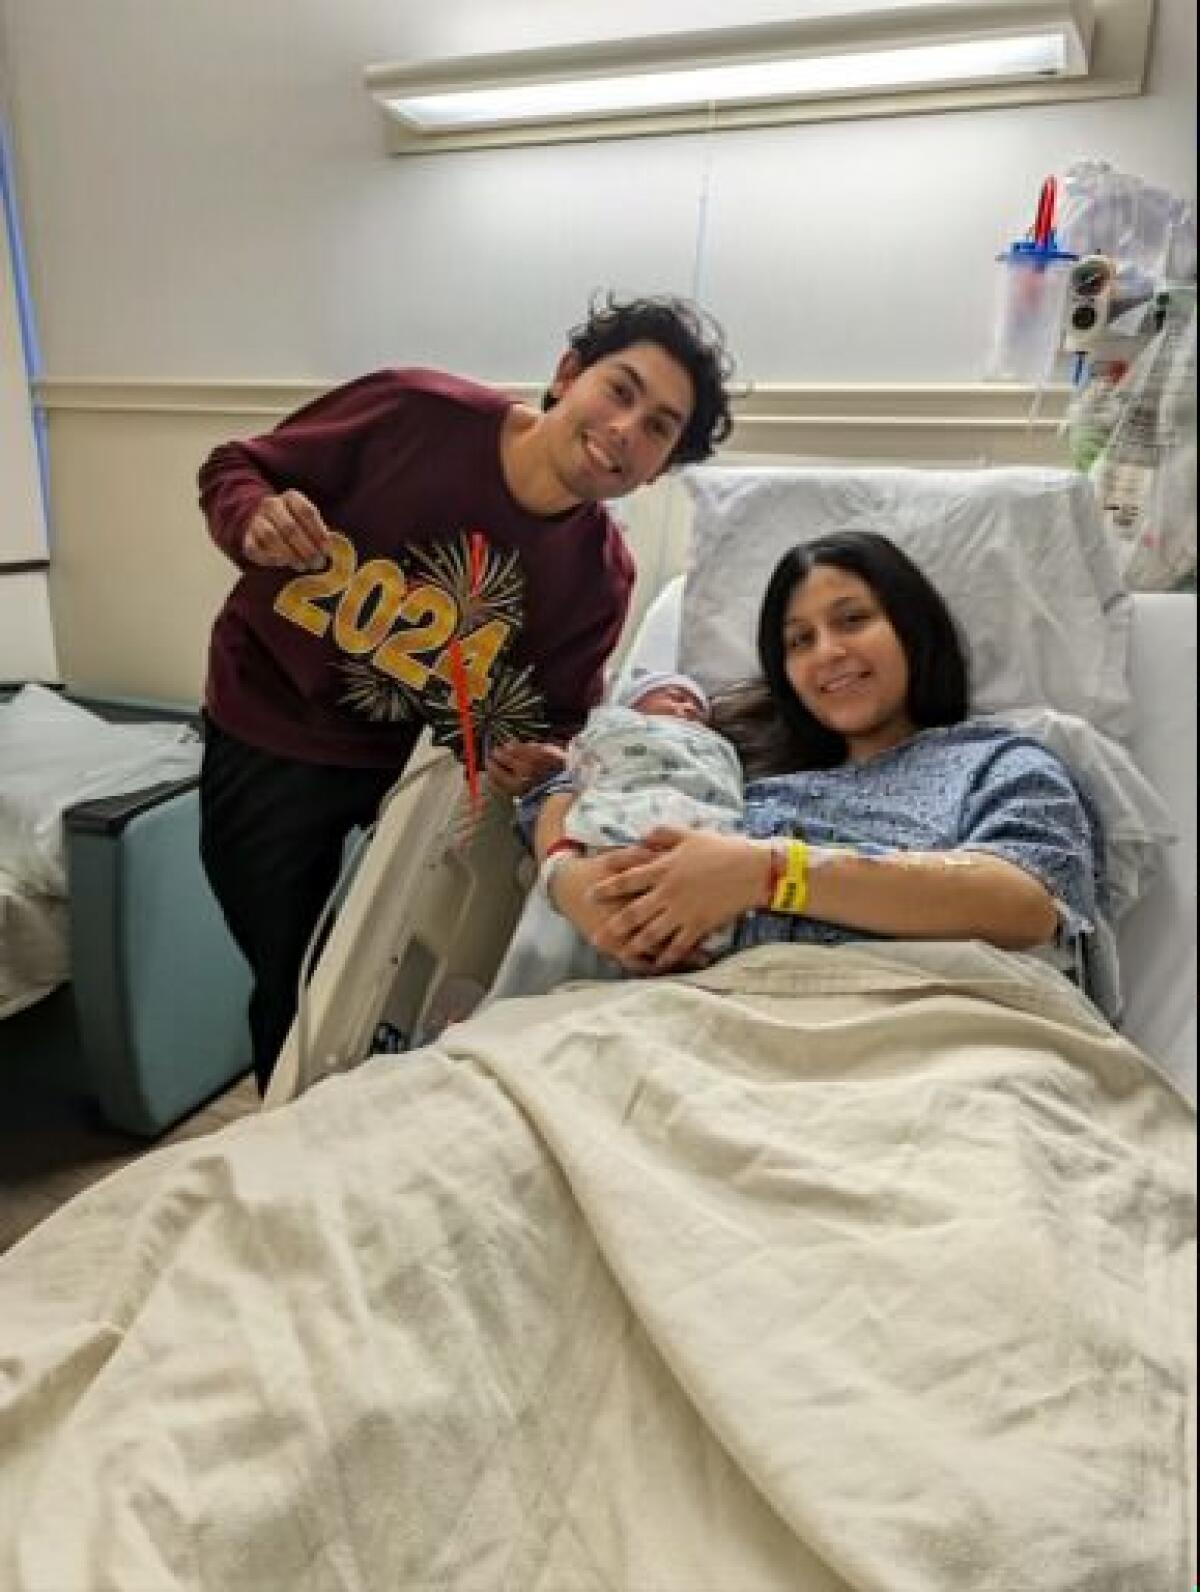 Angel and Meleni Morales with their newborn baby, Luka Morales.